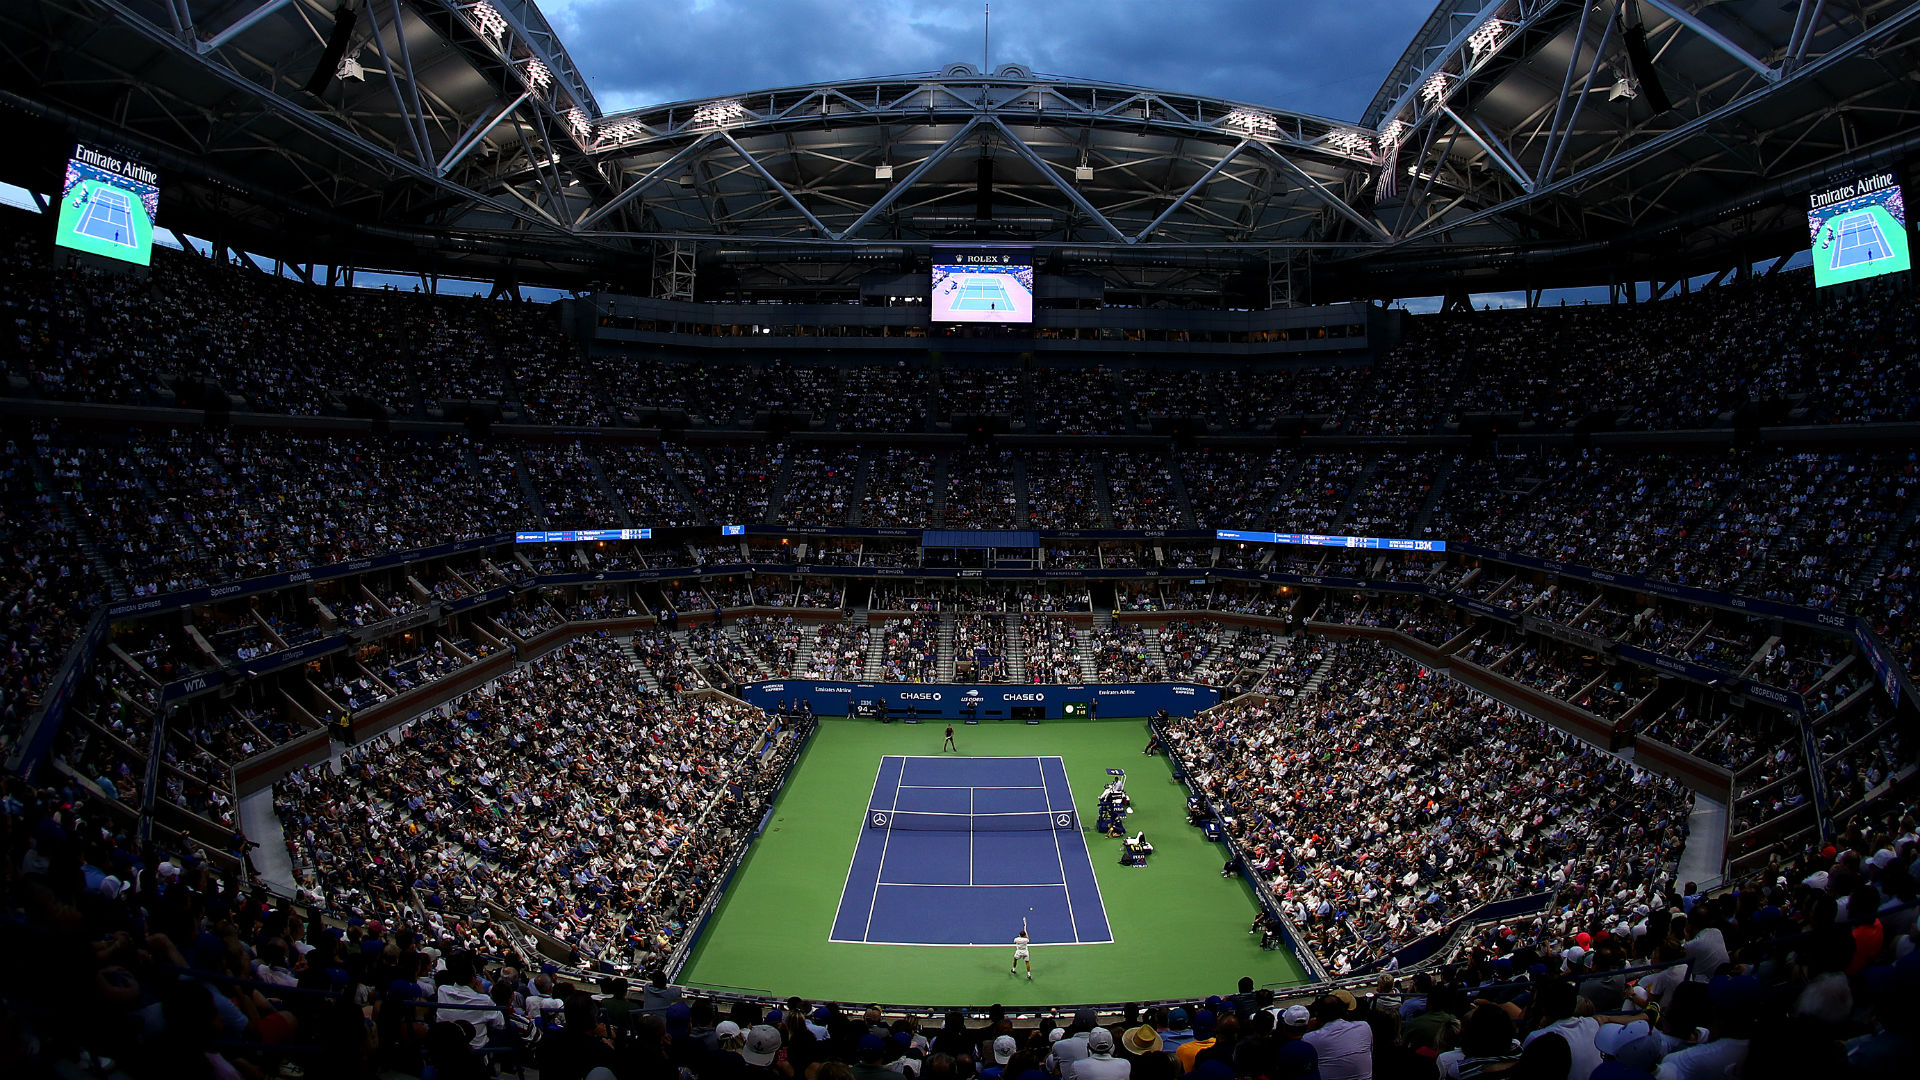 With the season set to restart in August, the ATP has made several temporary amendments to its rankings system.